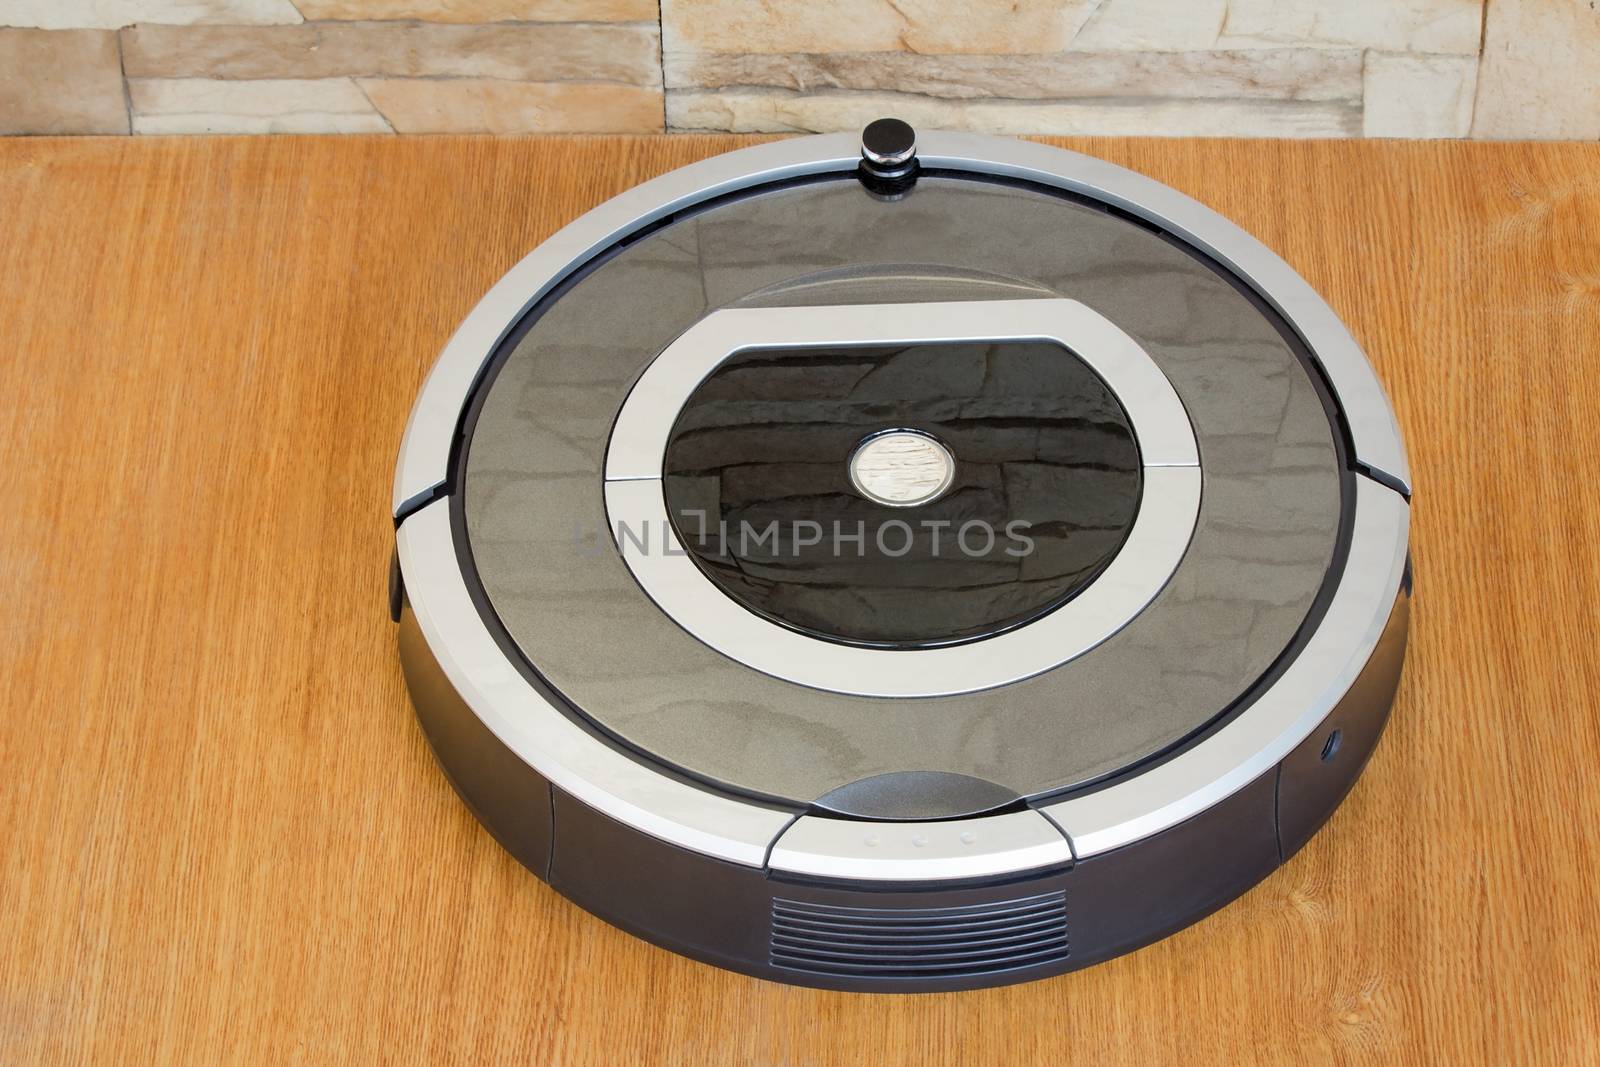 Robotics - the automated robot the vacuum cleaner. by georgina198